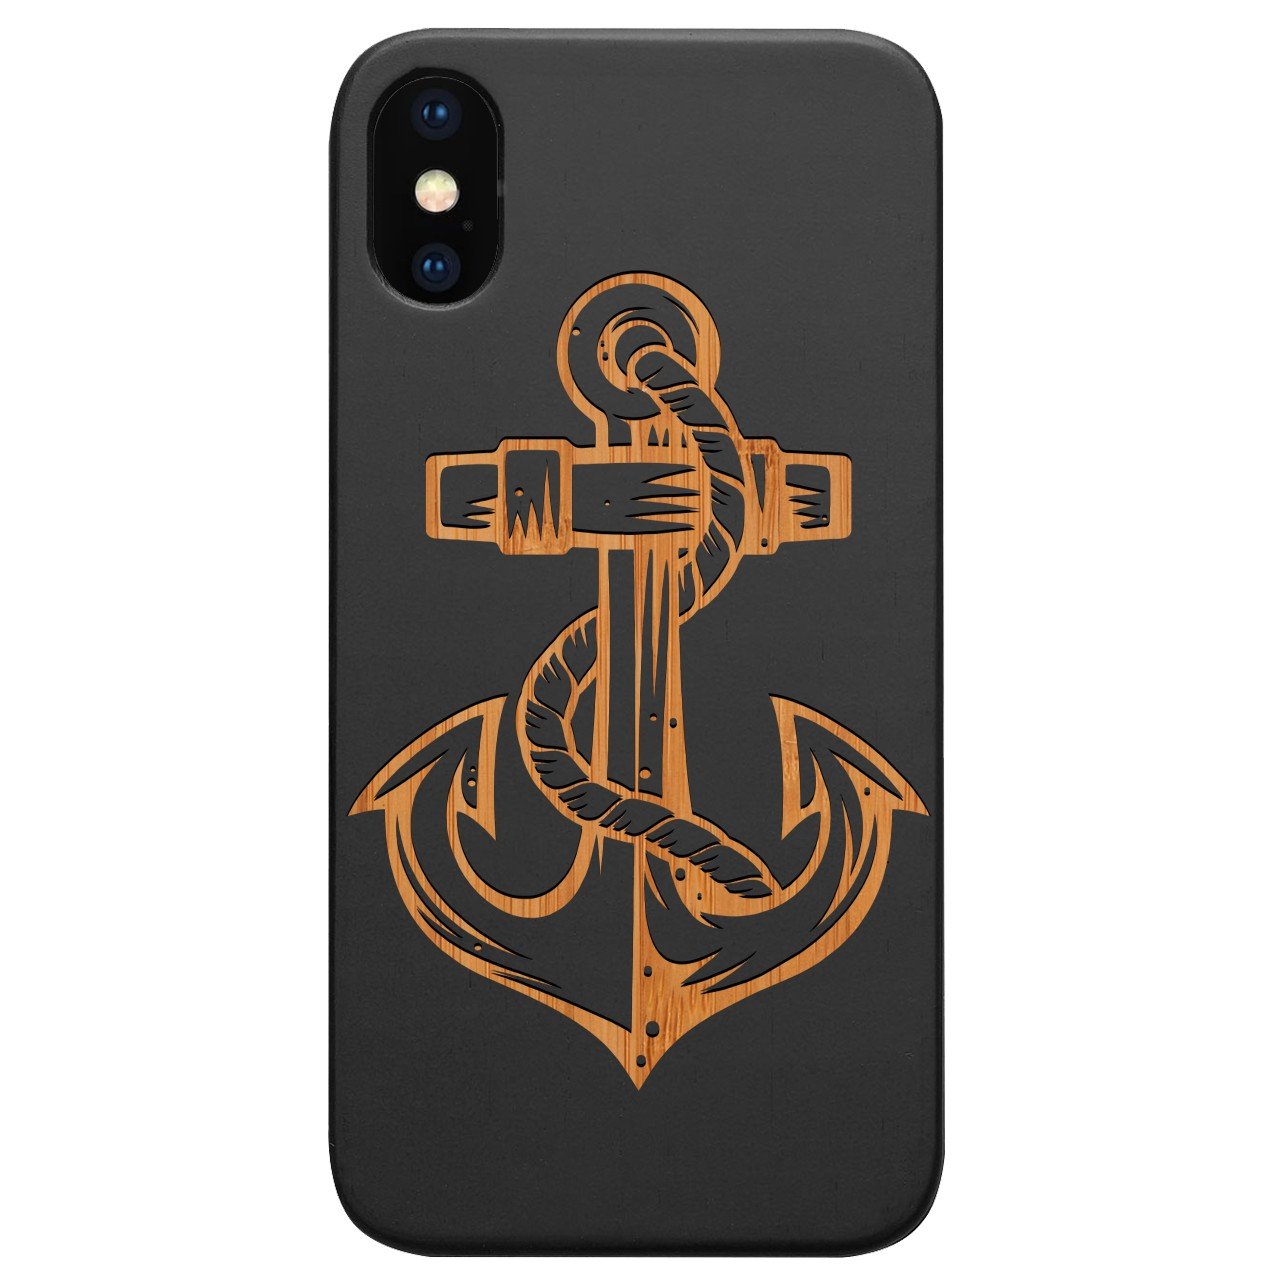 Anchor 1 - Engraved - Wooden Phone Case